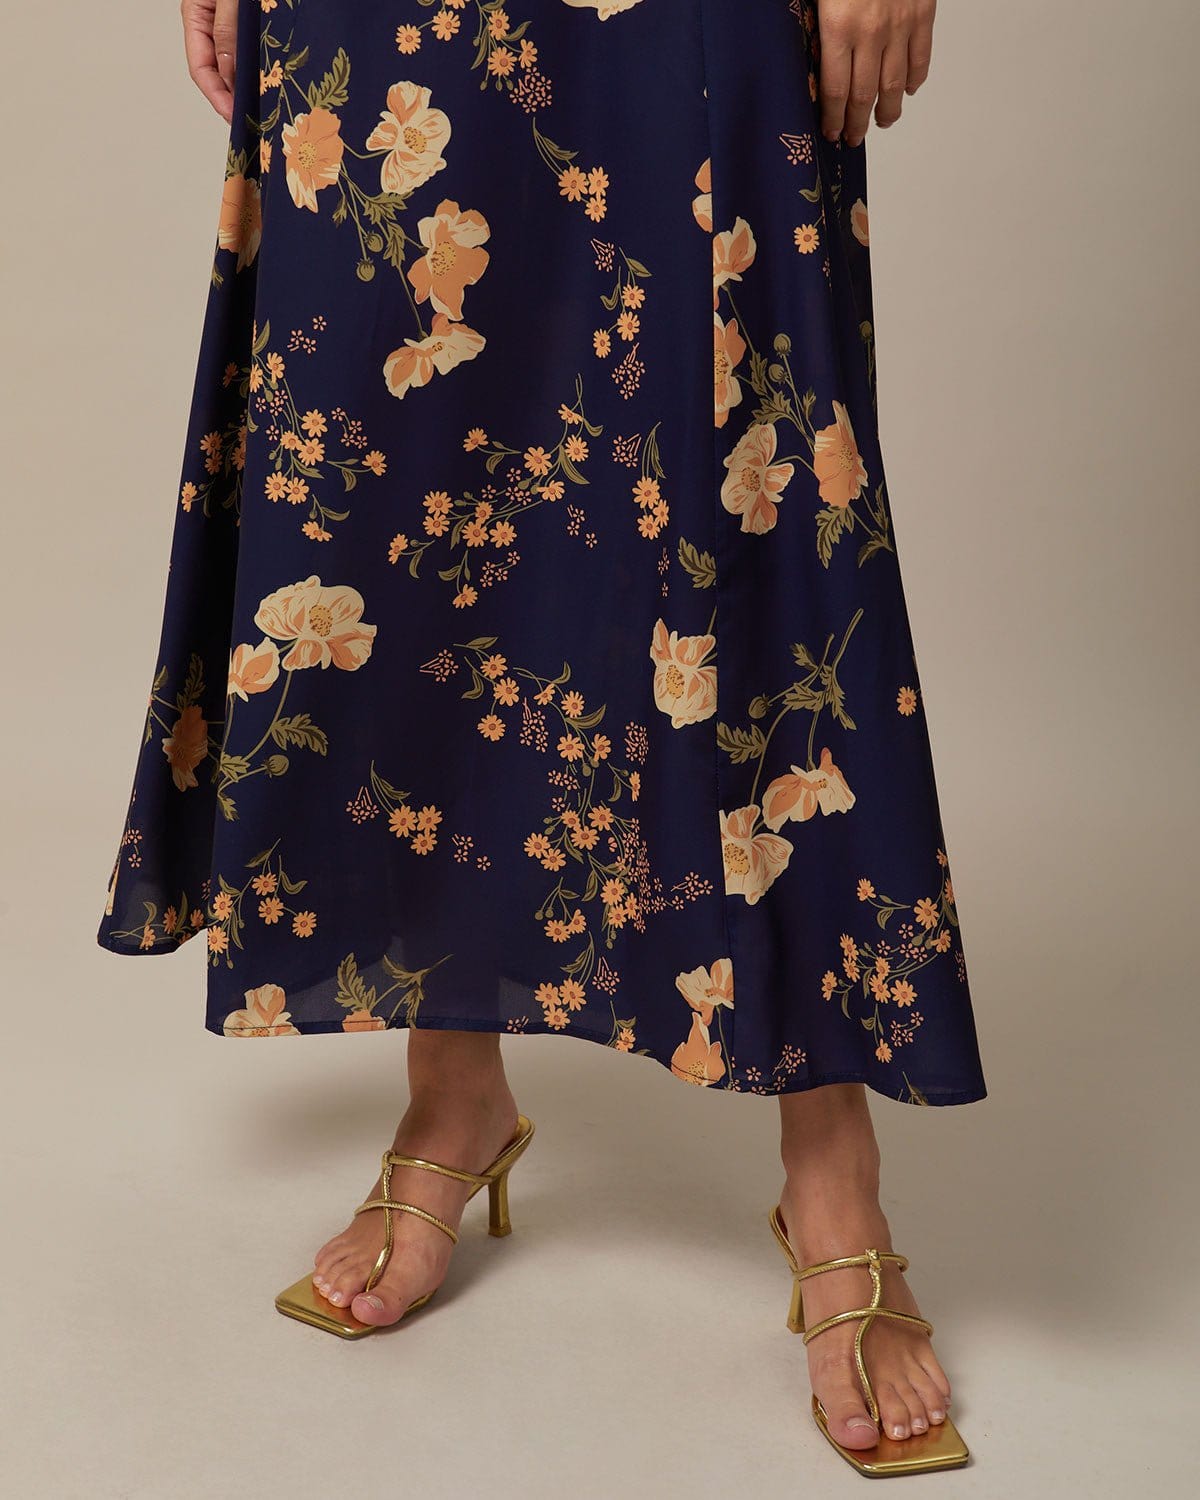 The Navy Floral Backless Maxi Dress Dresses - RIHOAS